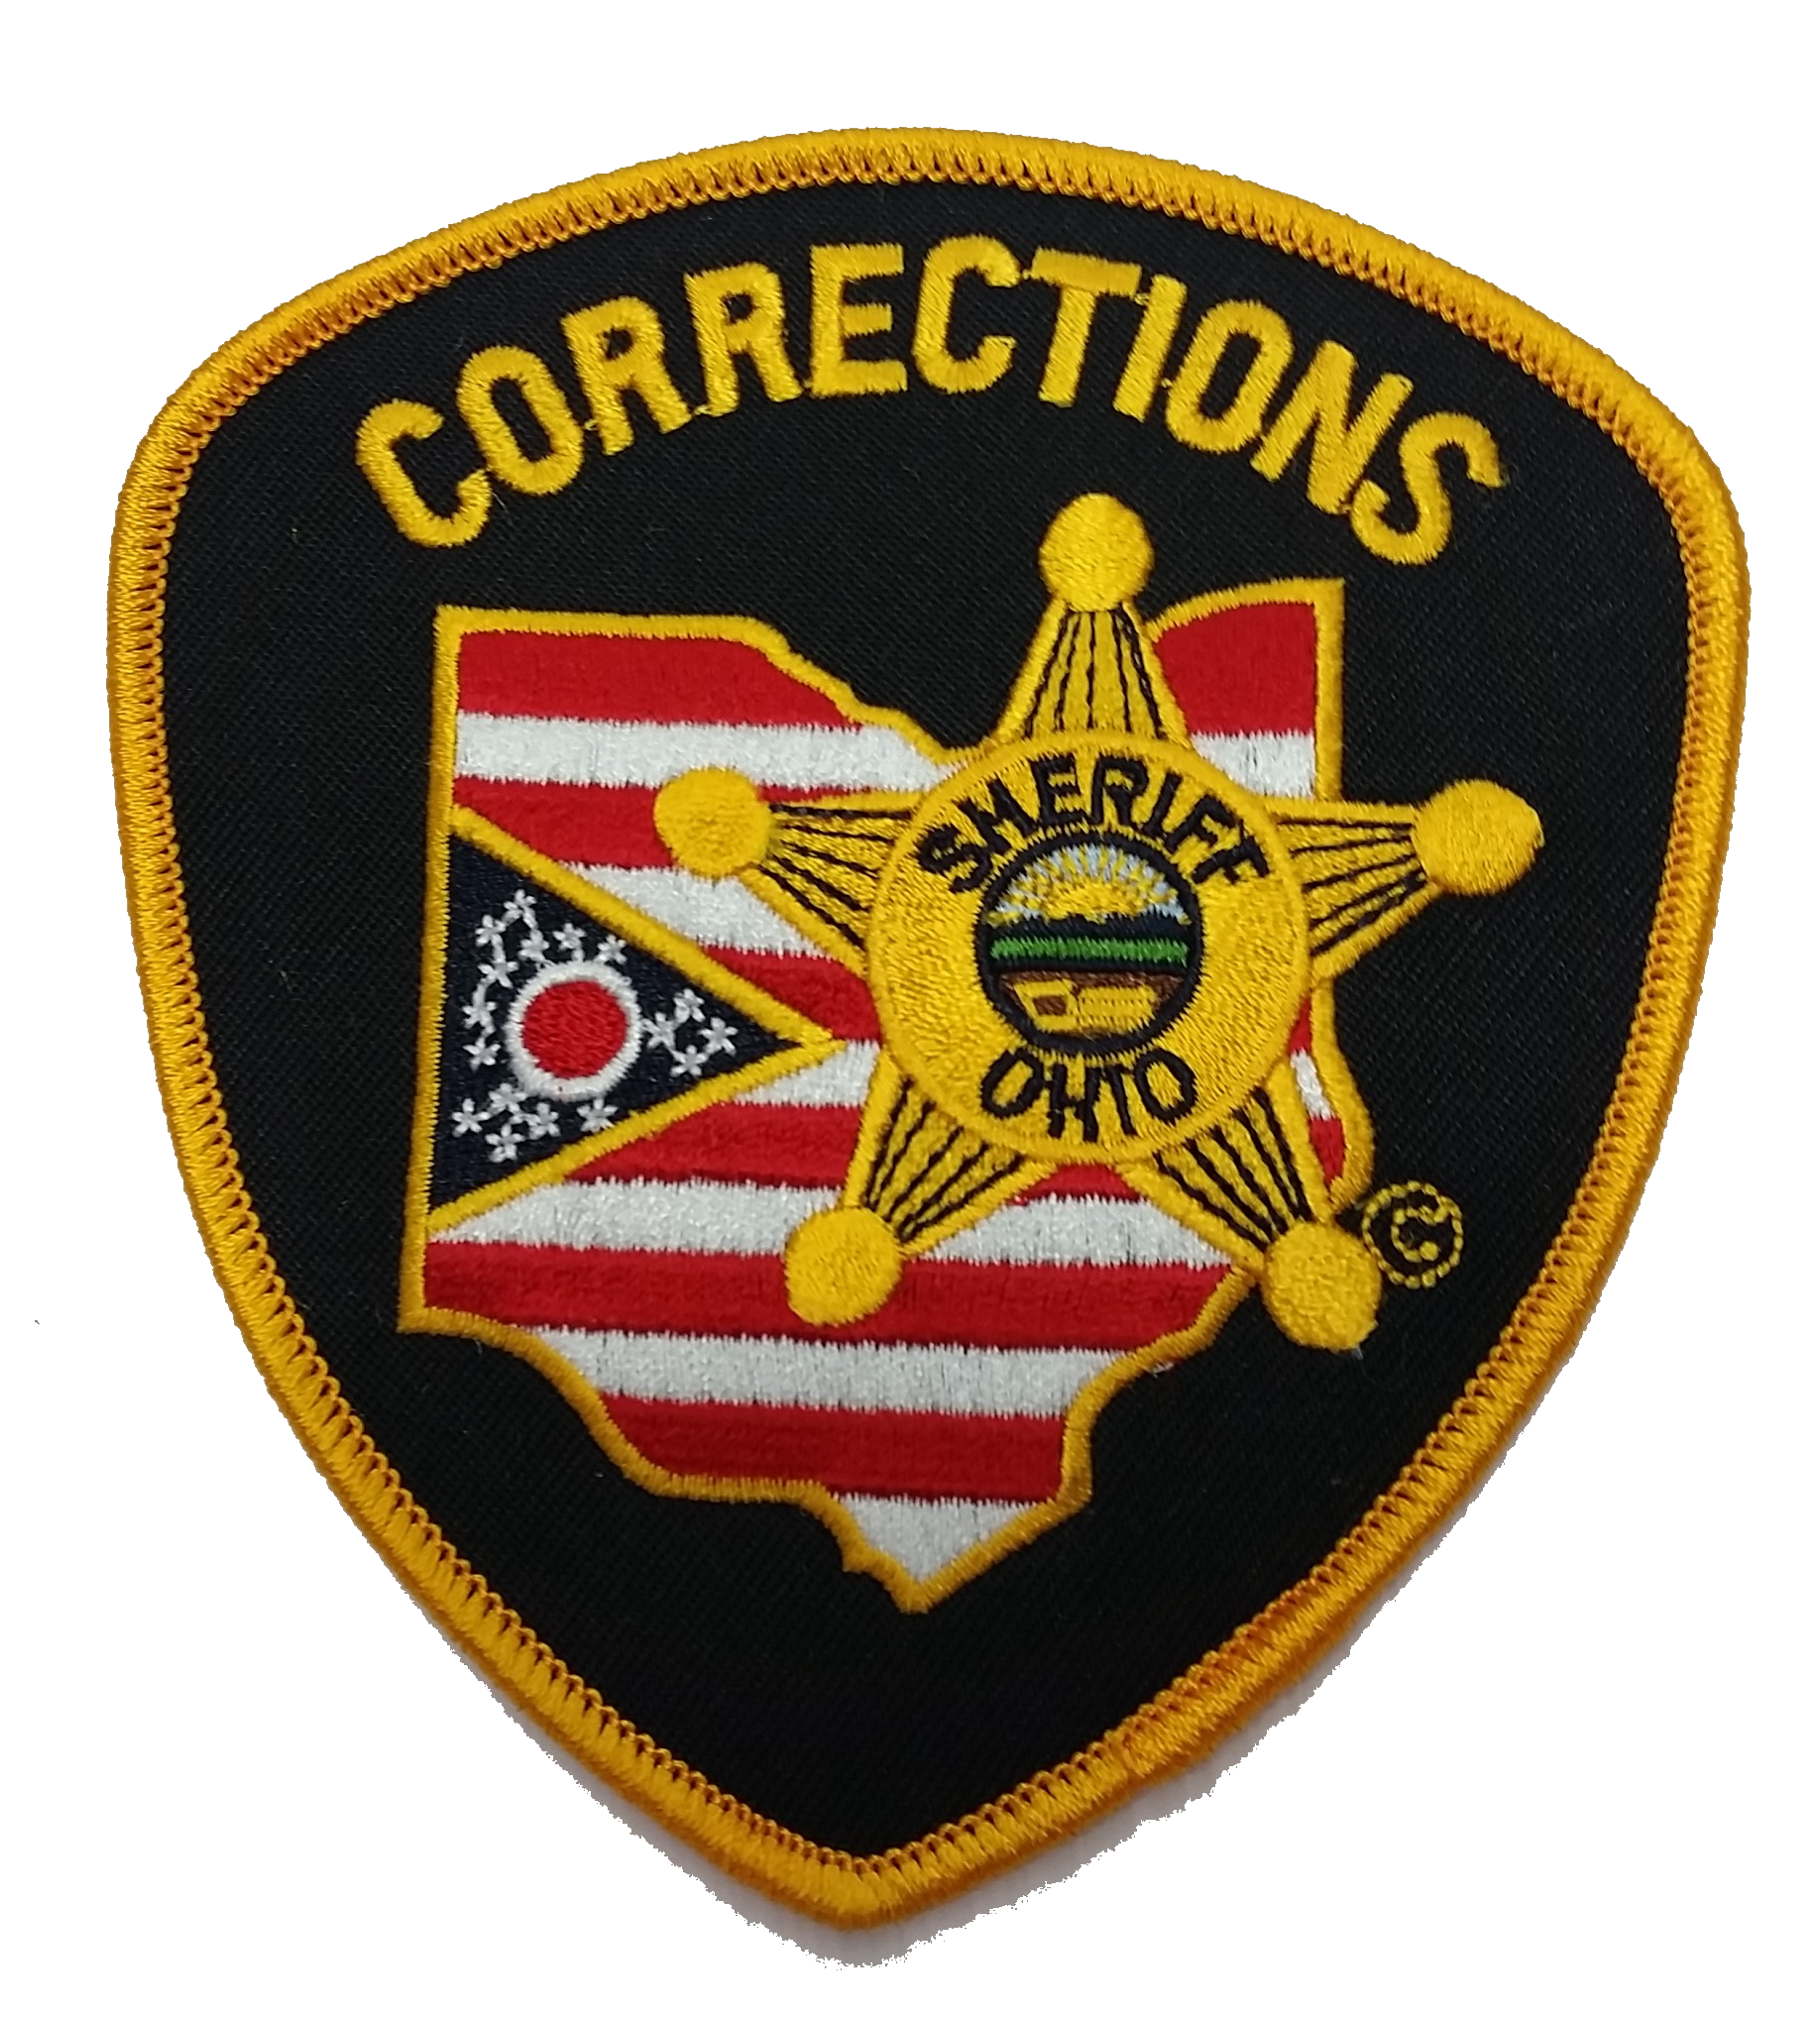 Ohio Sheriff "Corrections" Patches - 2 Pack